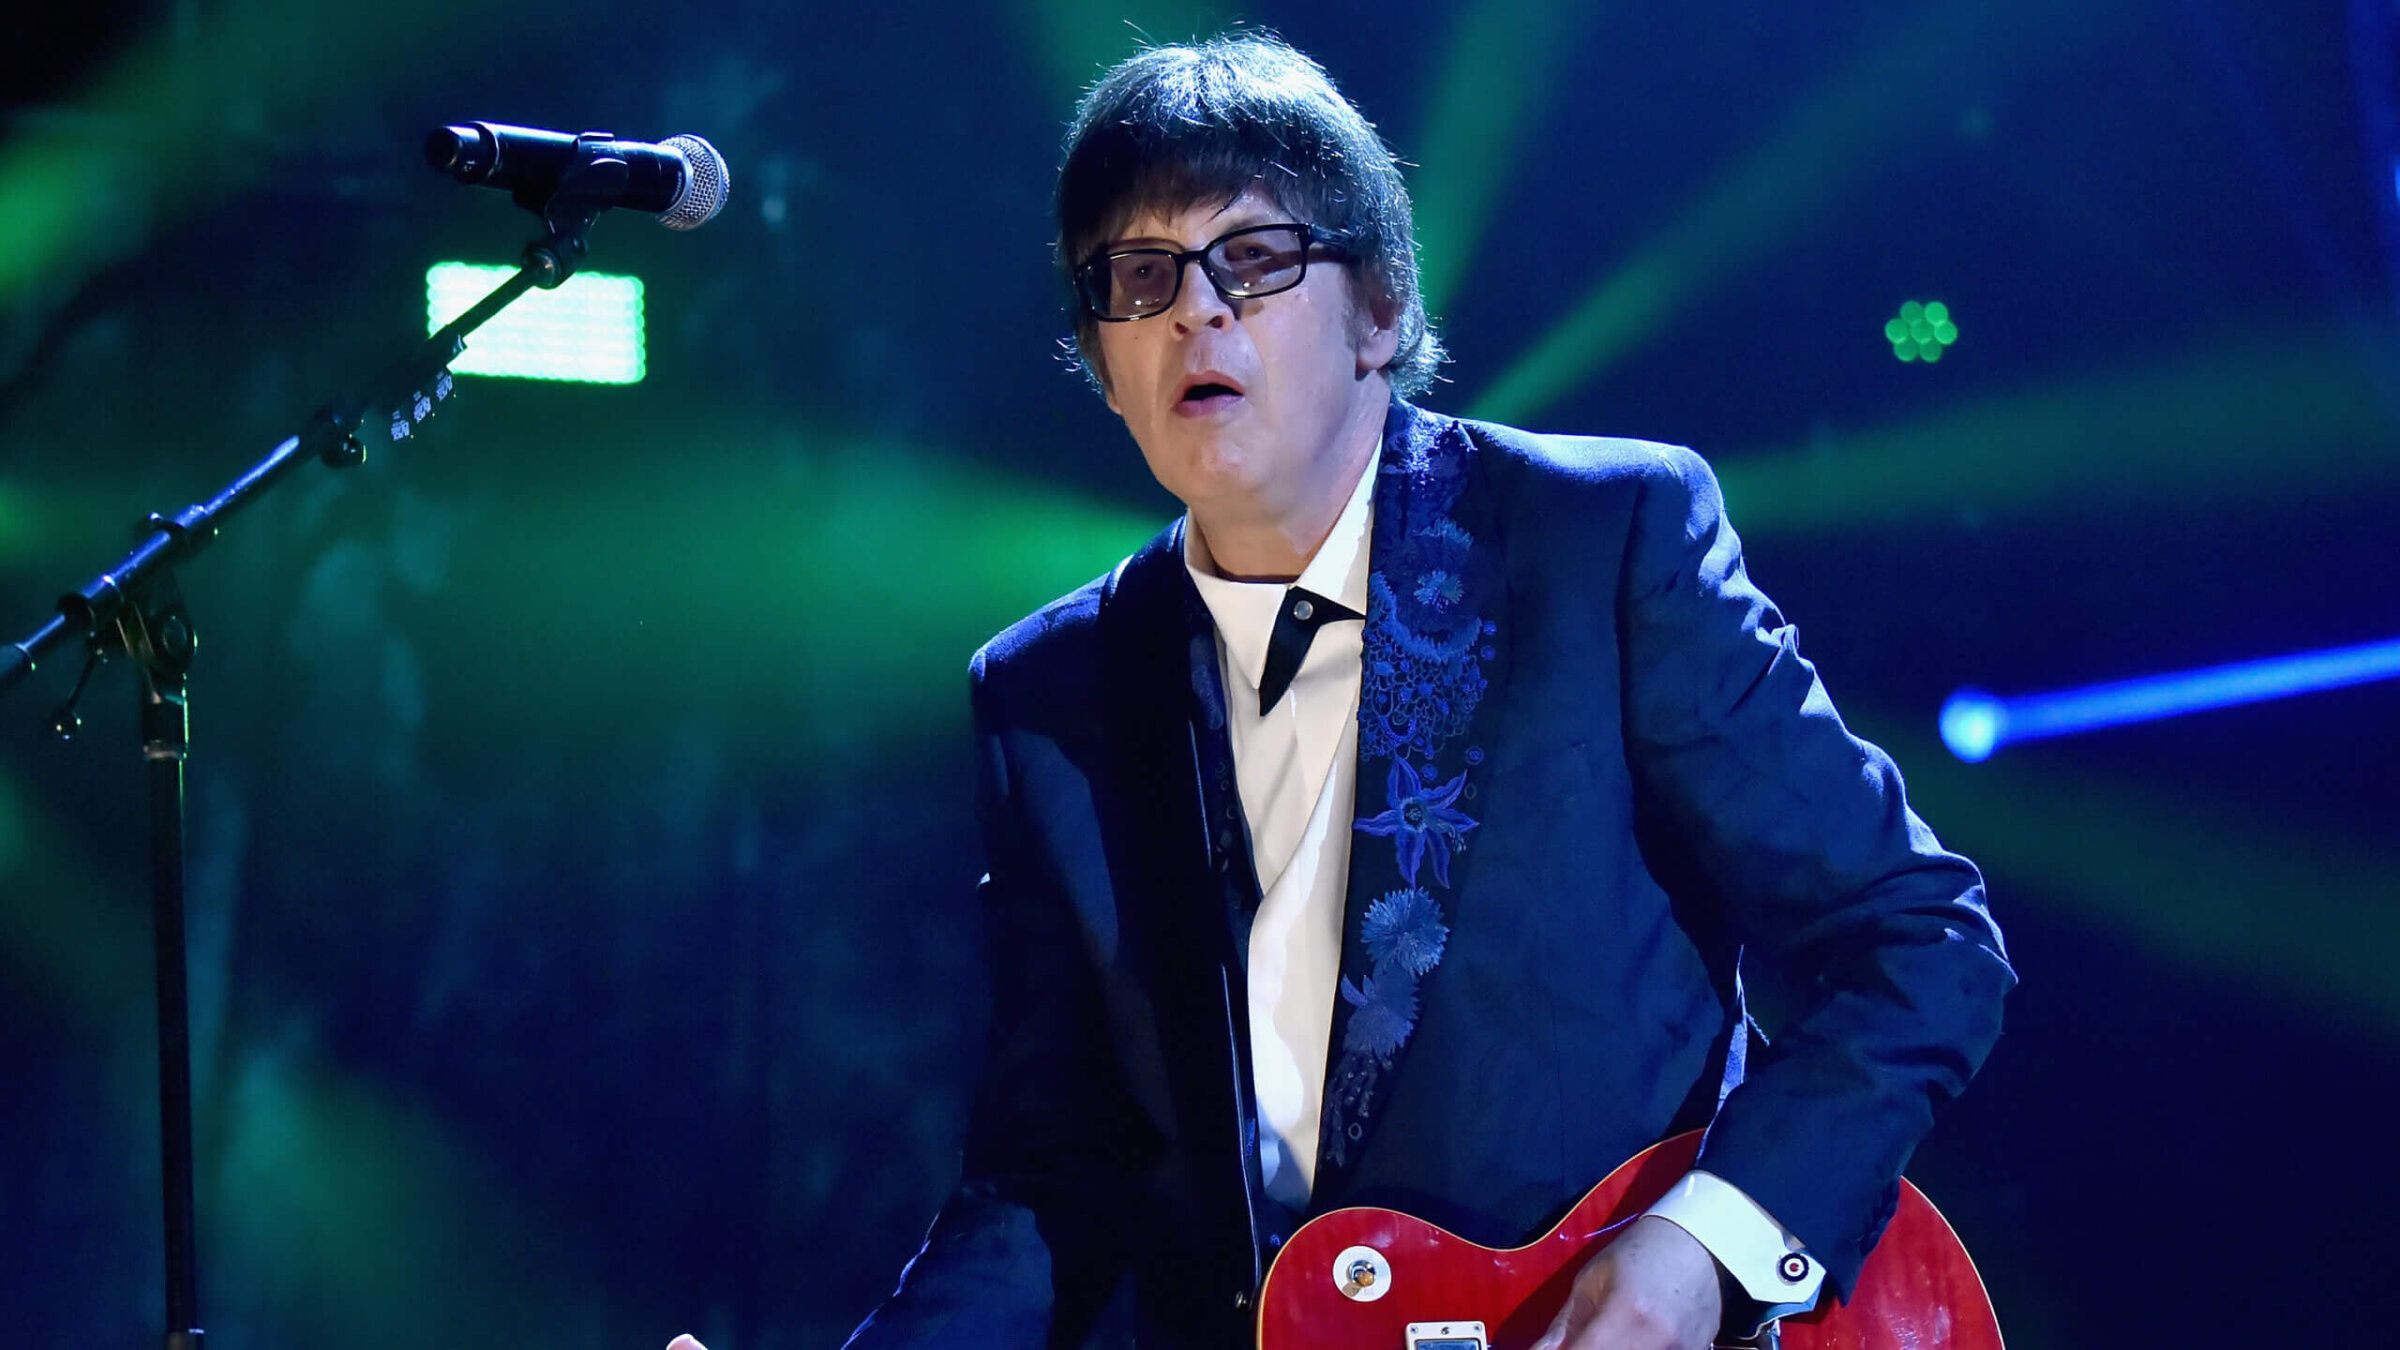 Elliot Easton performs at the Rock & Roll Hall of Fame induction ceremony.